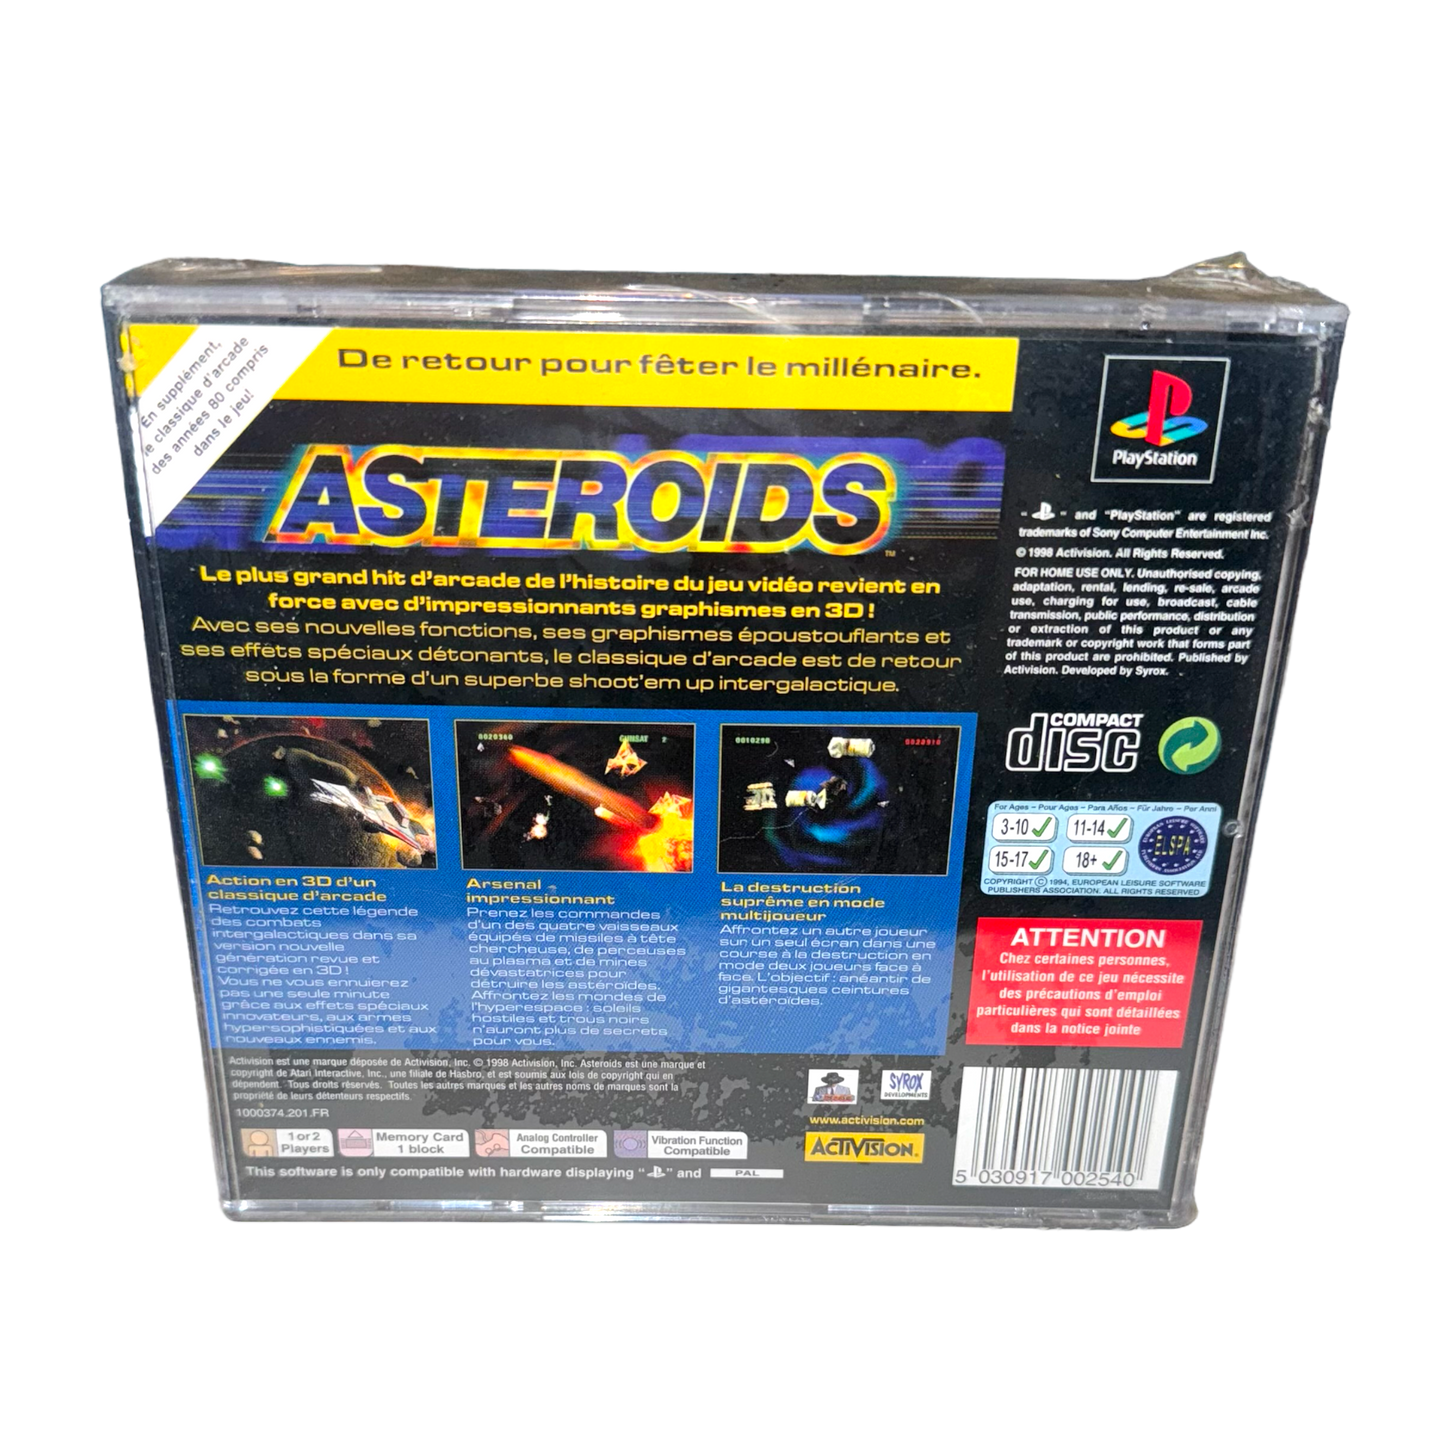 PS1 - Playstation 1 - ASTEROIDS Factory Sealed (PAL) Euro Release